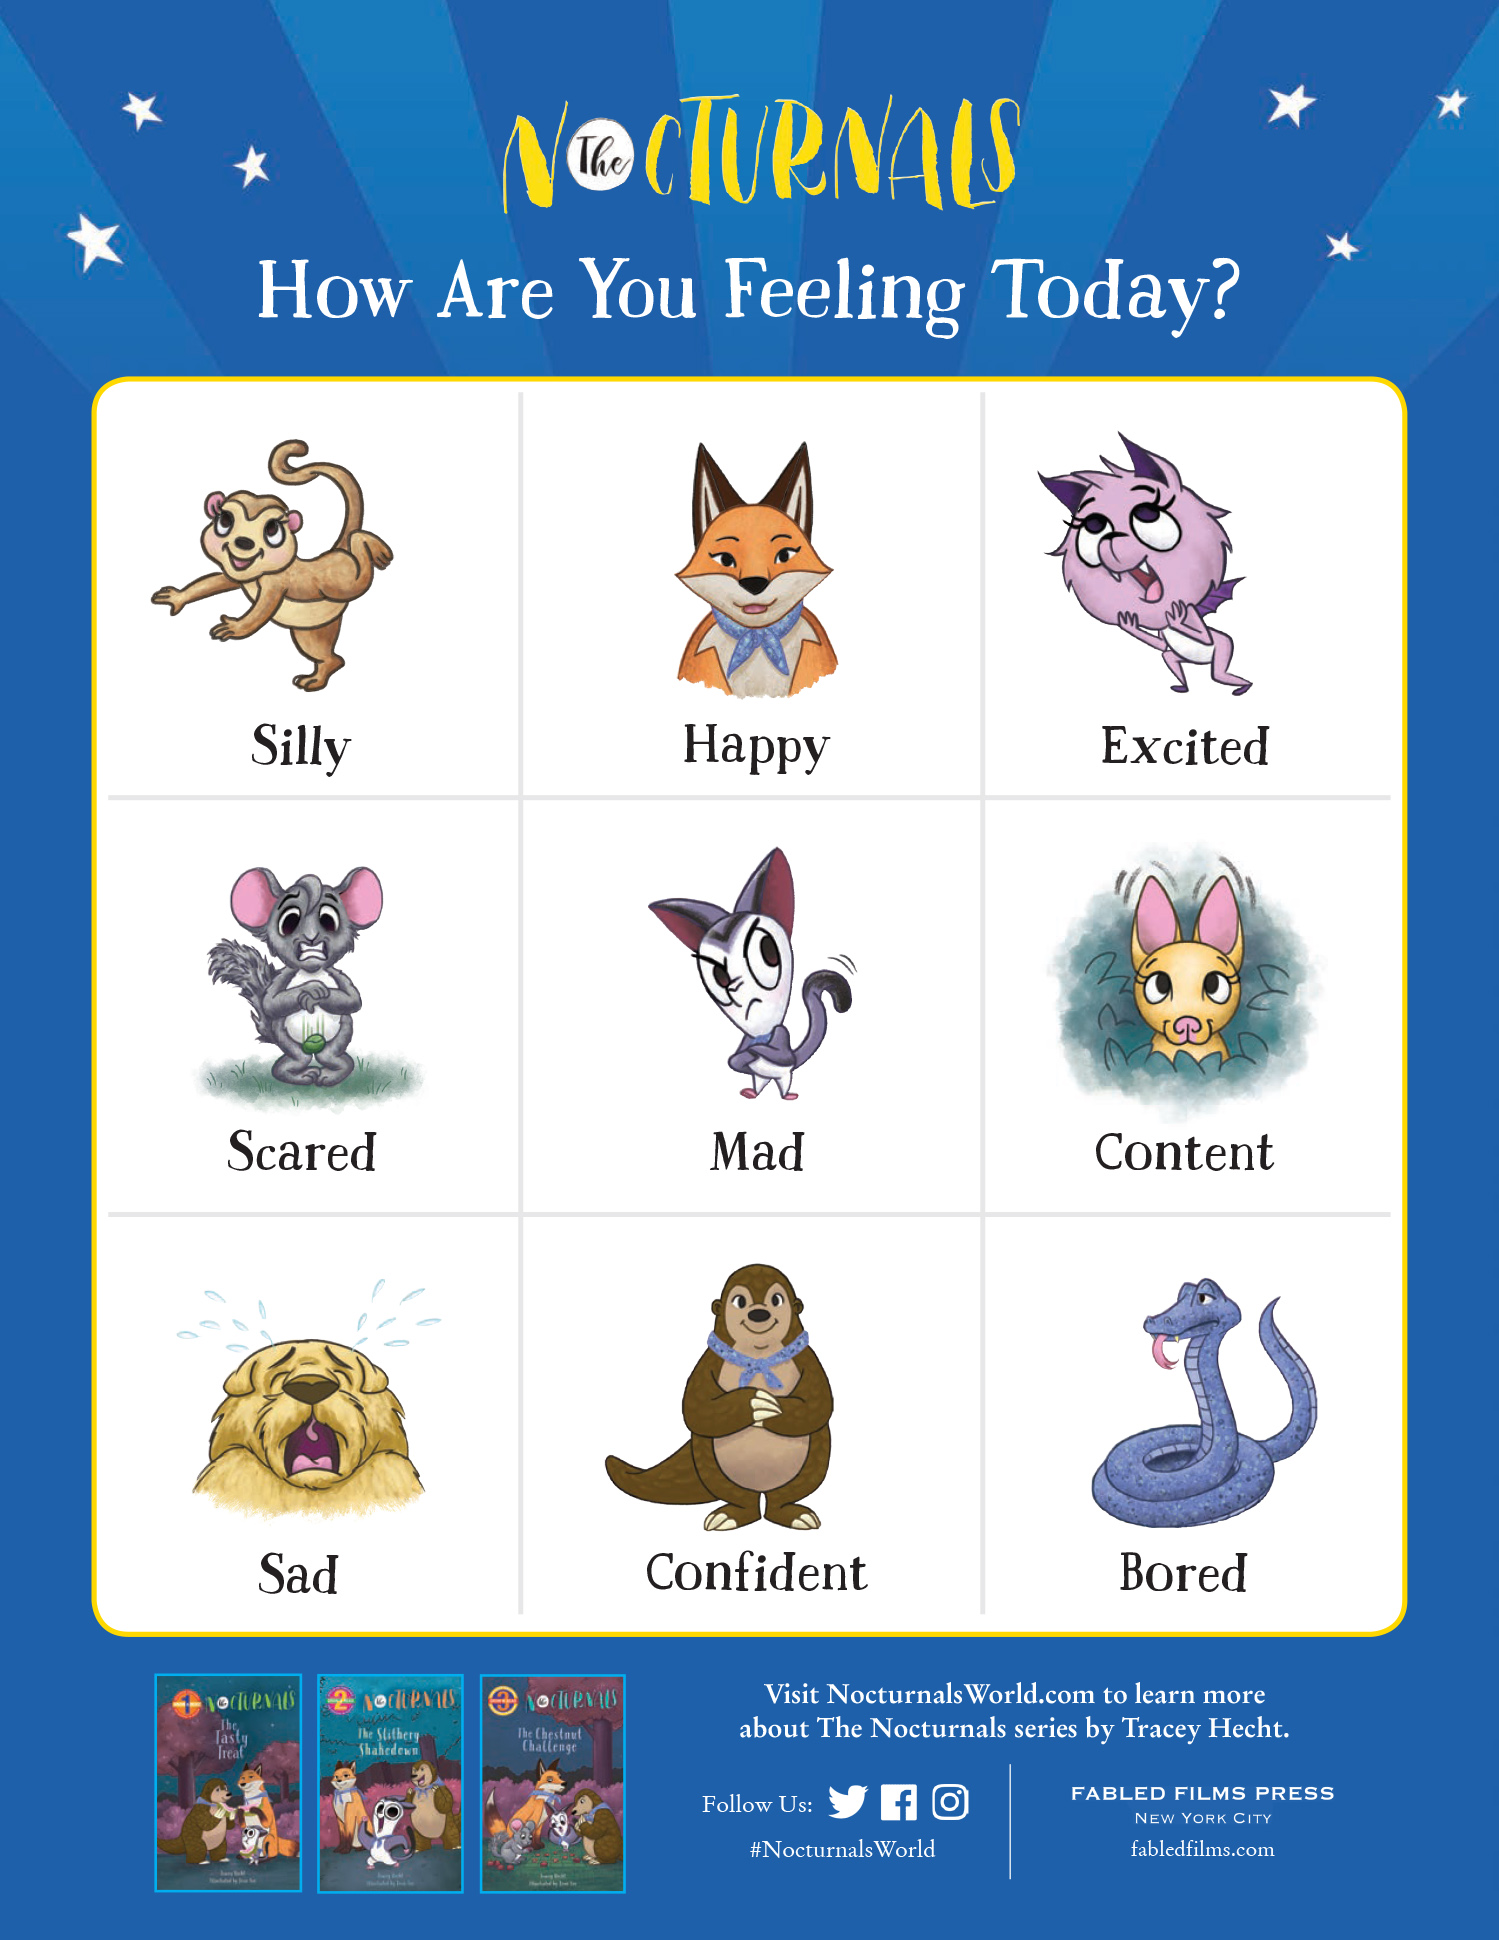 The Nocturnals Social Emotional Learning Poster & Brochure pdf includes a How Are You Feeling Today poster with character images and feeling names underneath to have children assess their emotions. The brochure includes endorsements of the Early Reader book program. 